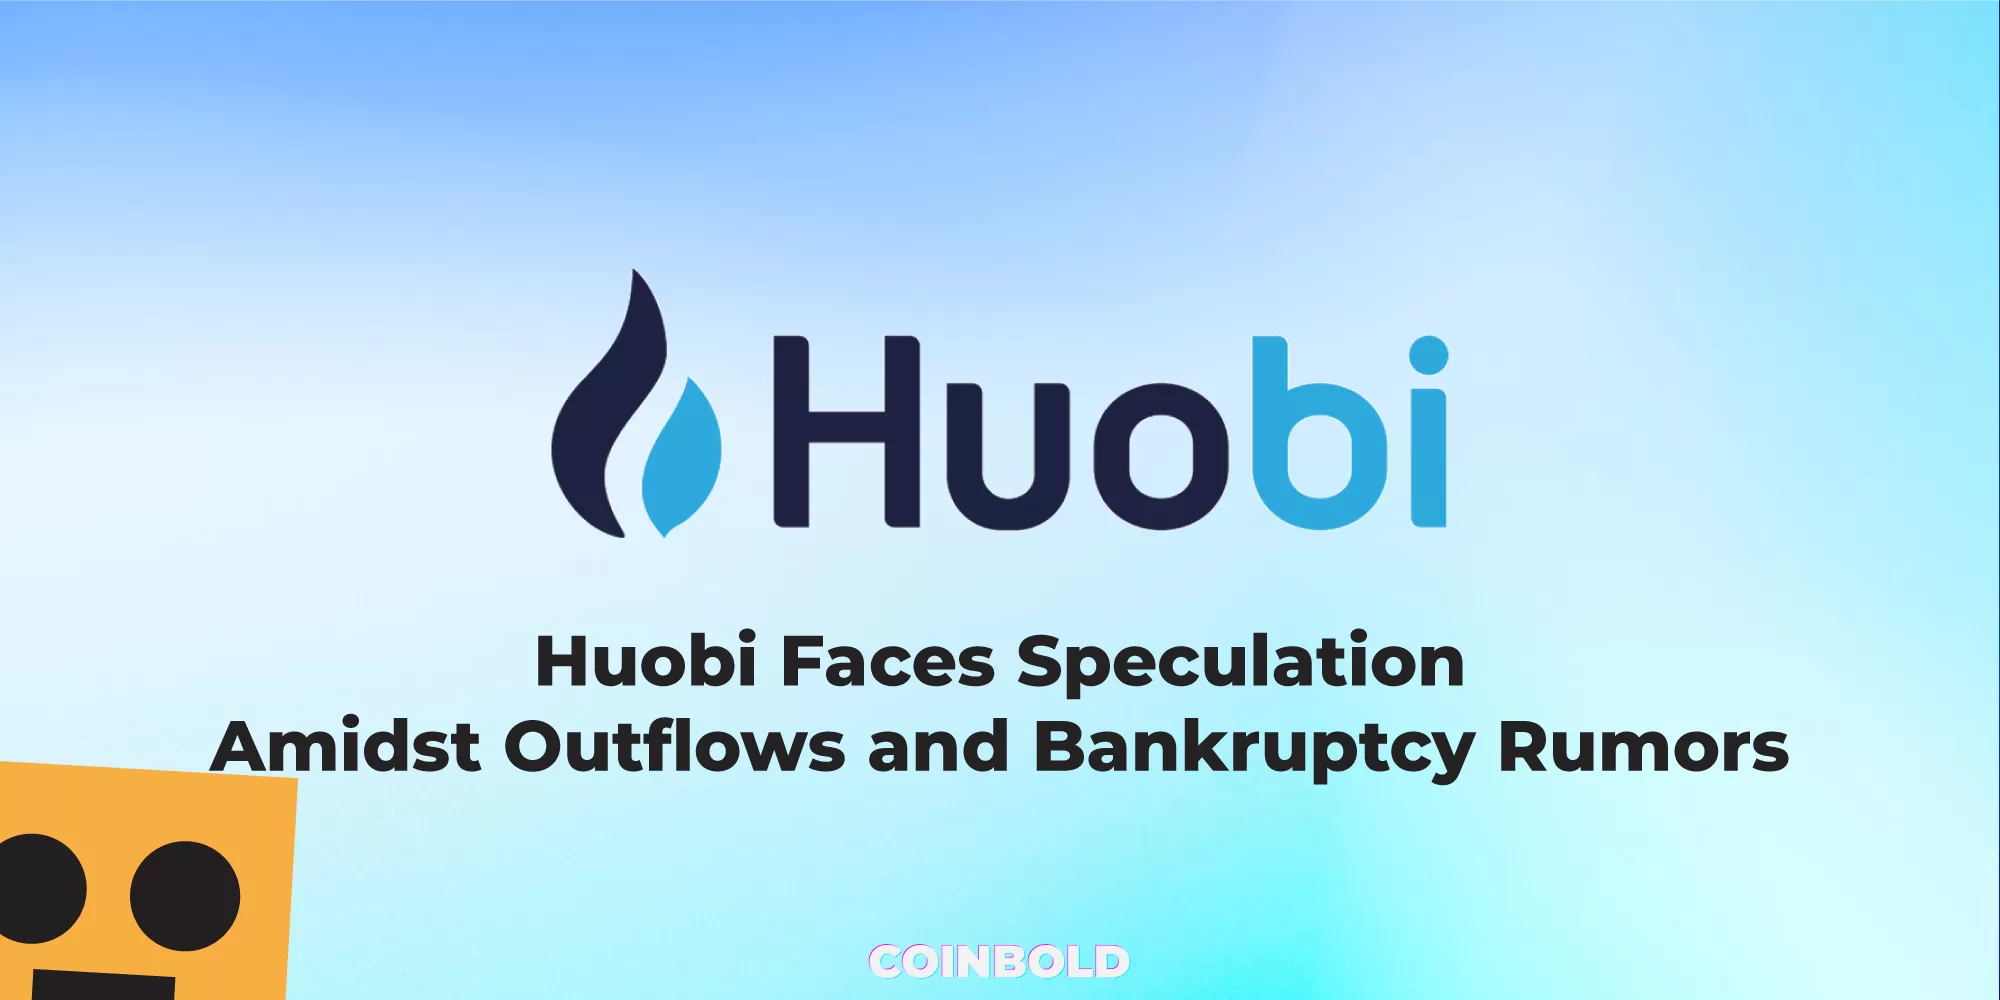 Huobi Faces Speculation Amidst Outflows and Bankruptcy Rumors